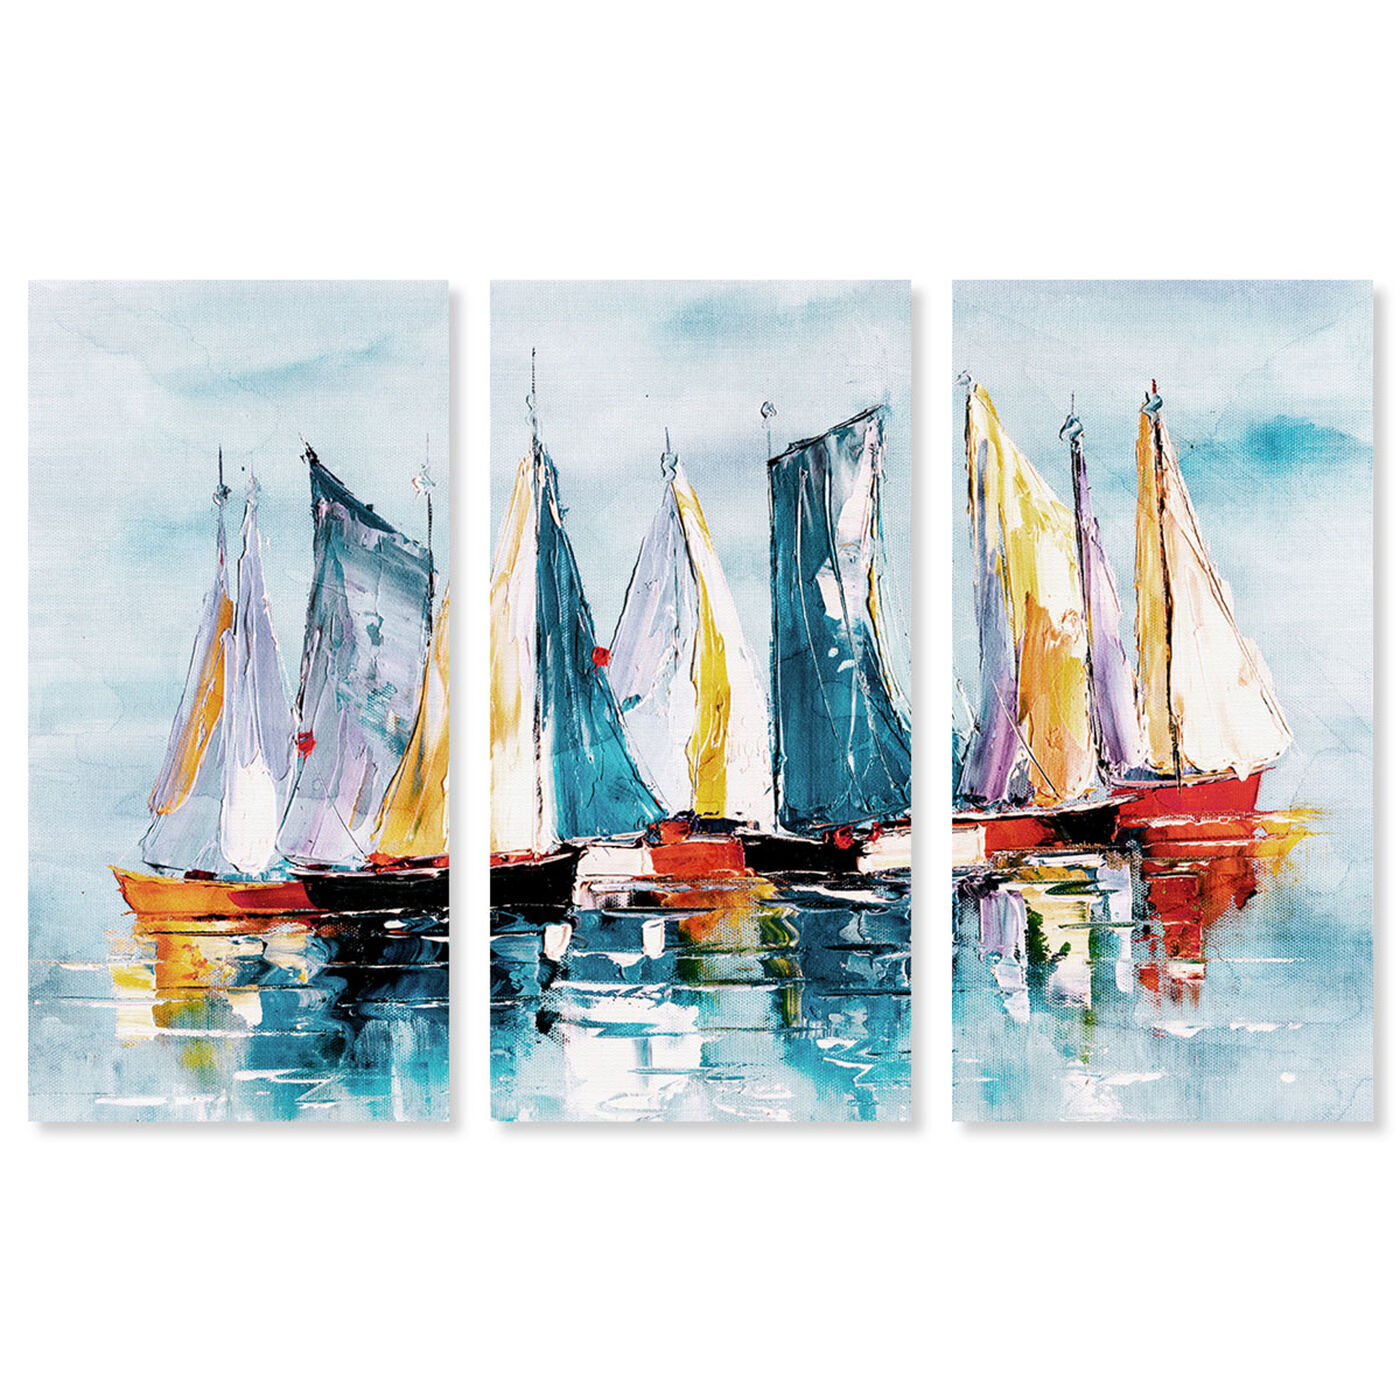 Abstract Sailboat Painting 3D Modern Oil Painting on Canvas Large Wall